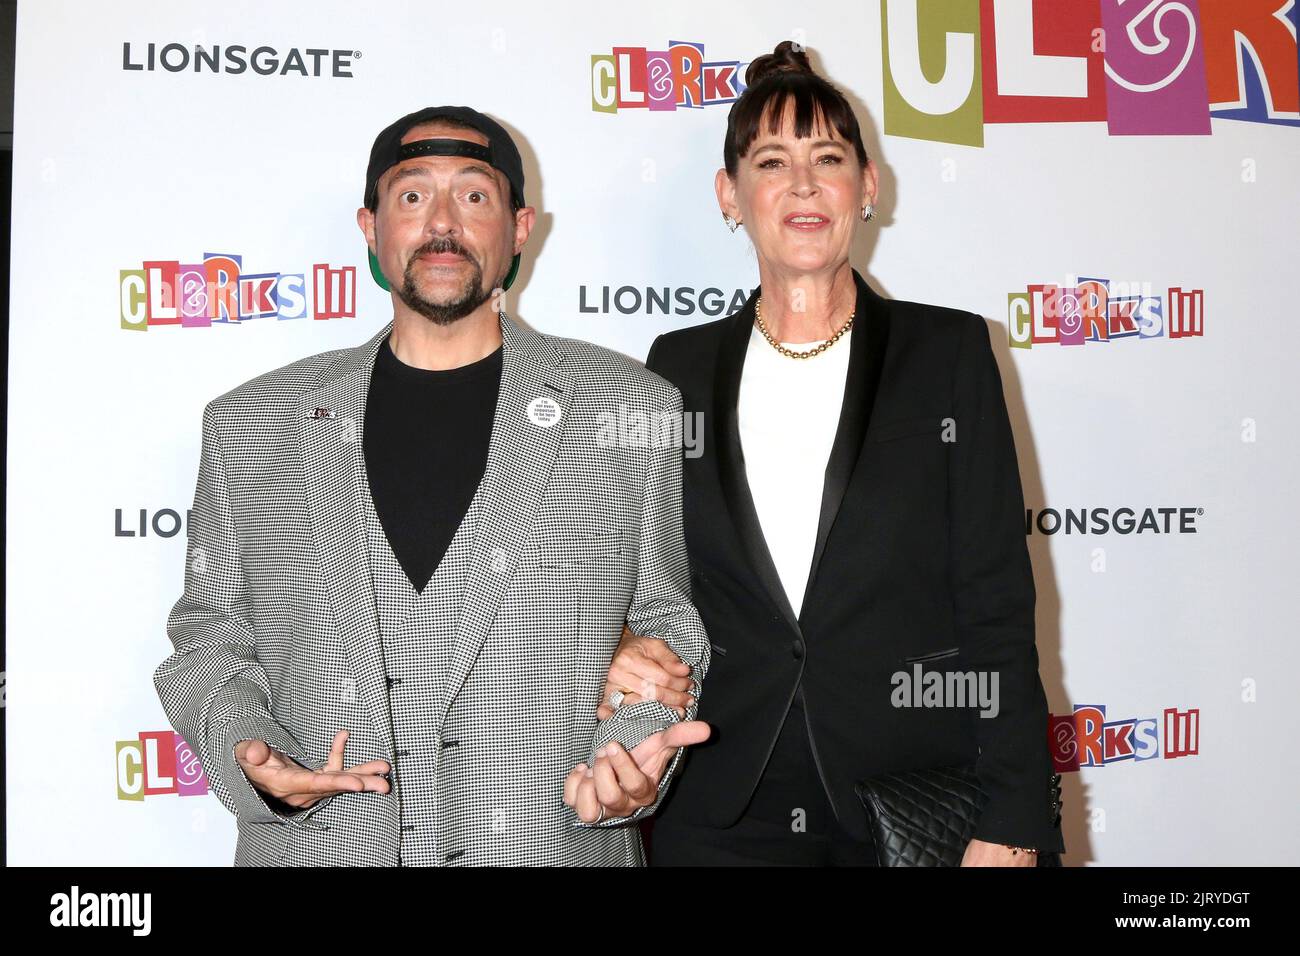 LOS ANGELES - AUG 24:  Kevin Smith, Jennifer Schwalbach Smith at the Clerks III Premiere at TCL Chinese Theater on August 24, 2022 in Los Angeles, CA Stock Photo